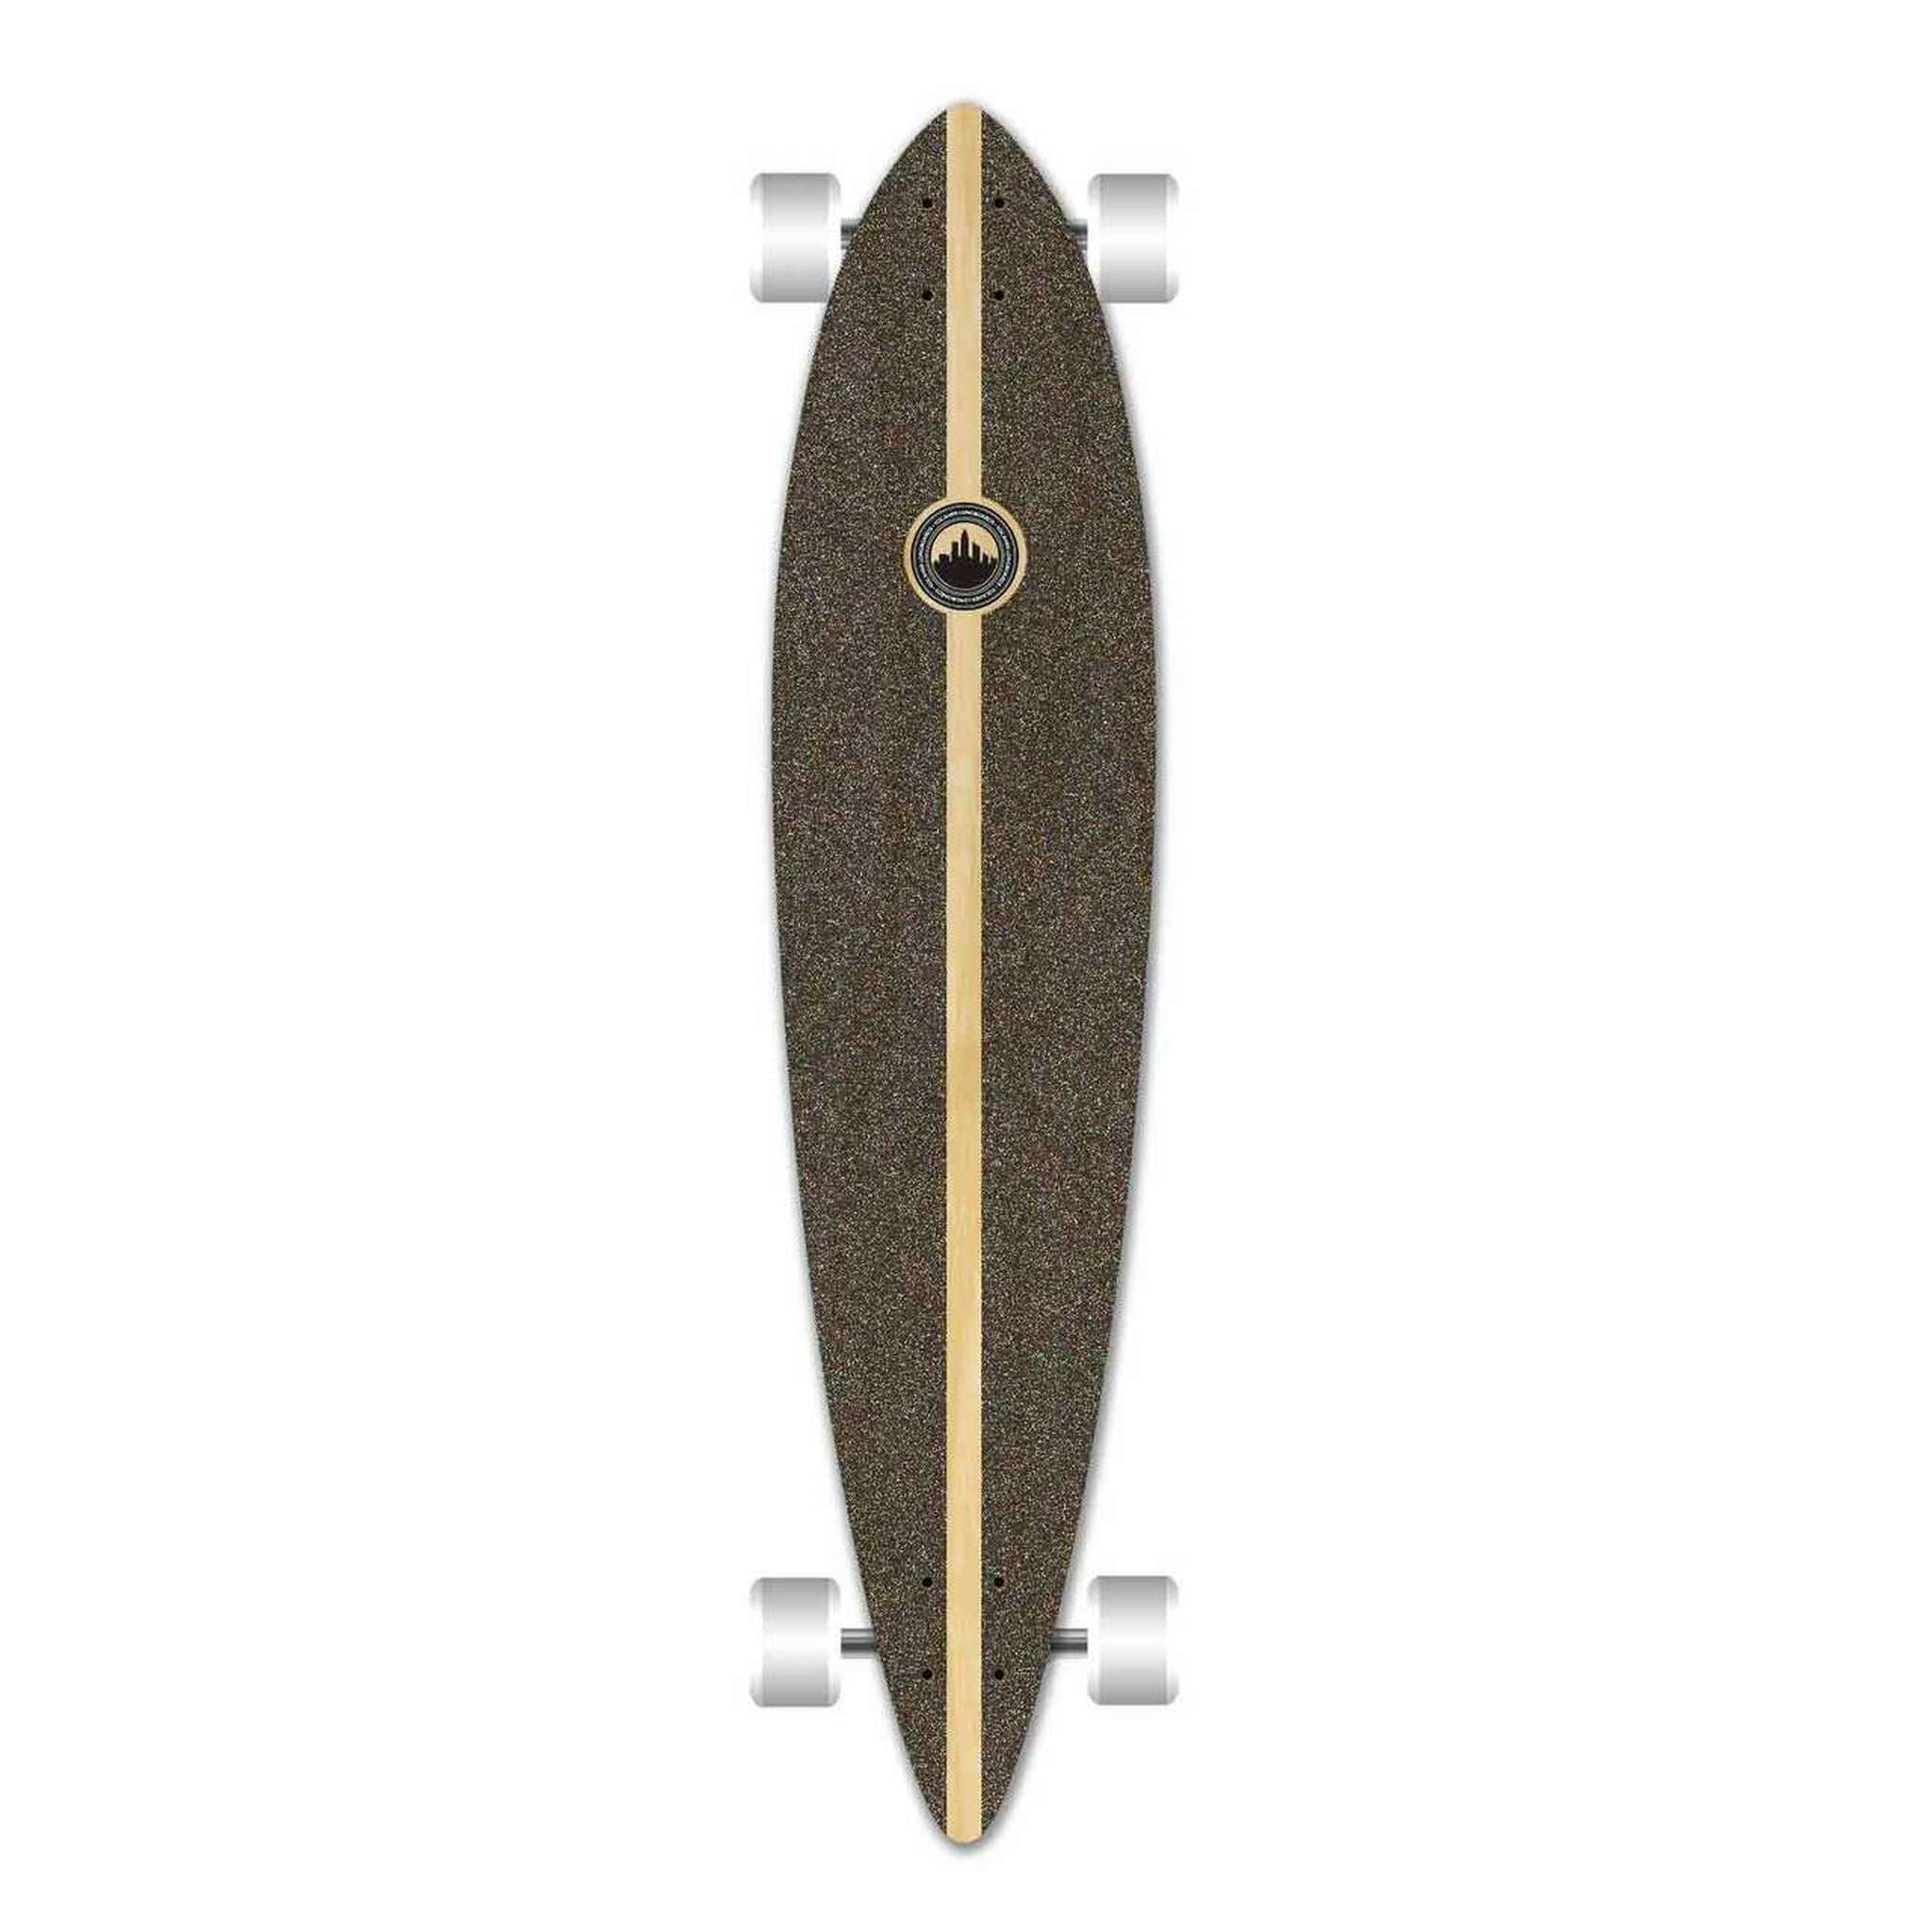 YOCAHER - Getaway Pintail Longboard - Planche Complete